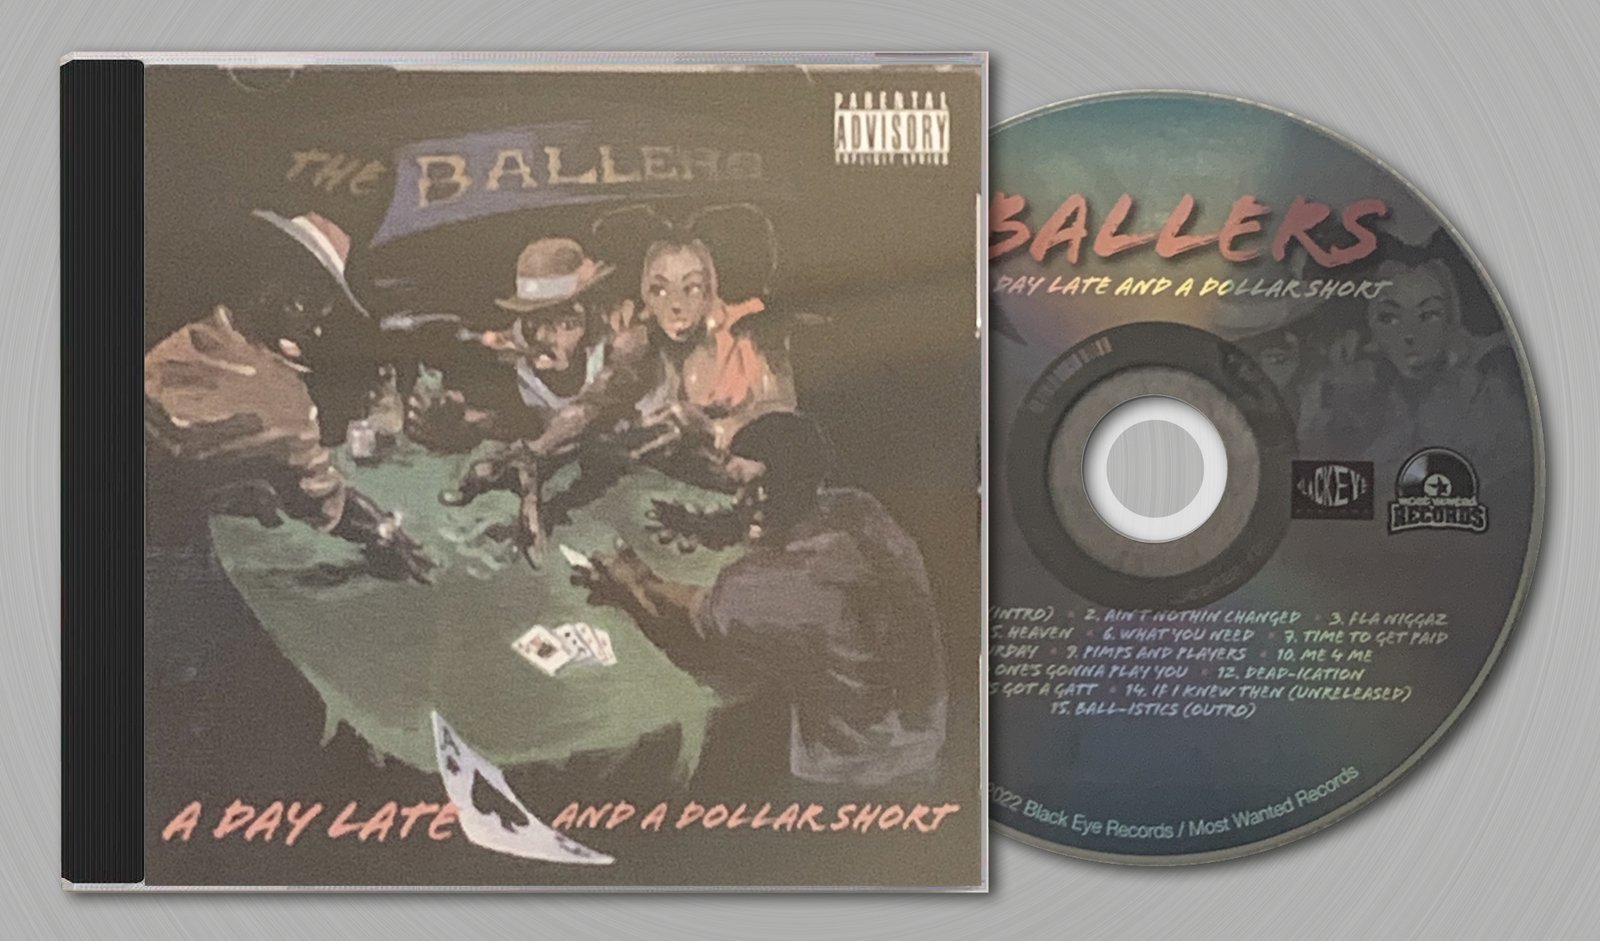 CD: The Ballers - A Day Late And A Dollar Short 1997-2022 REISSUE (Orlando,  FL)